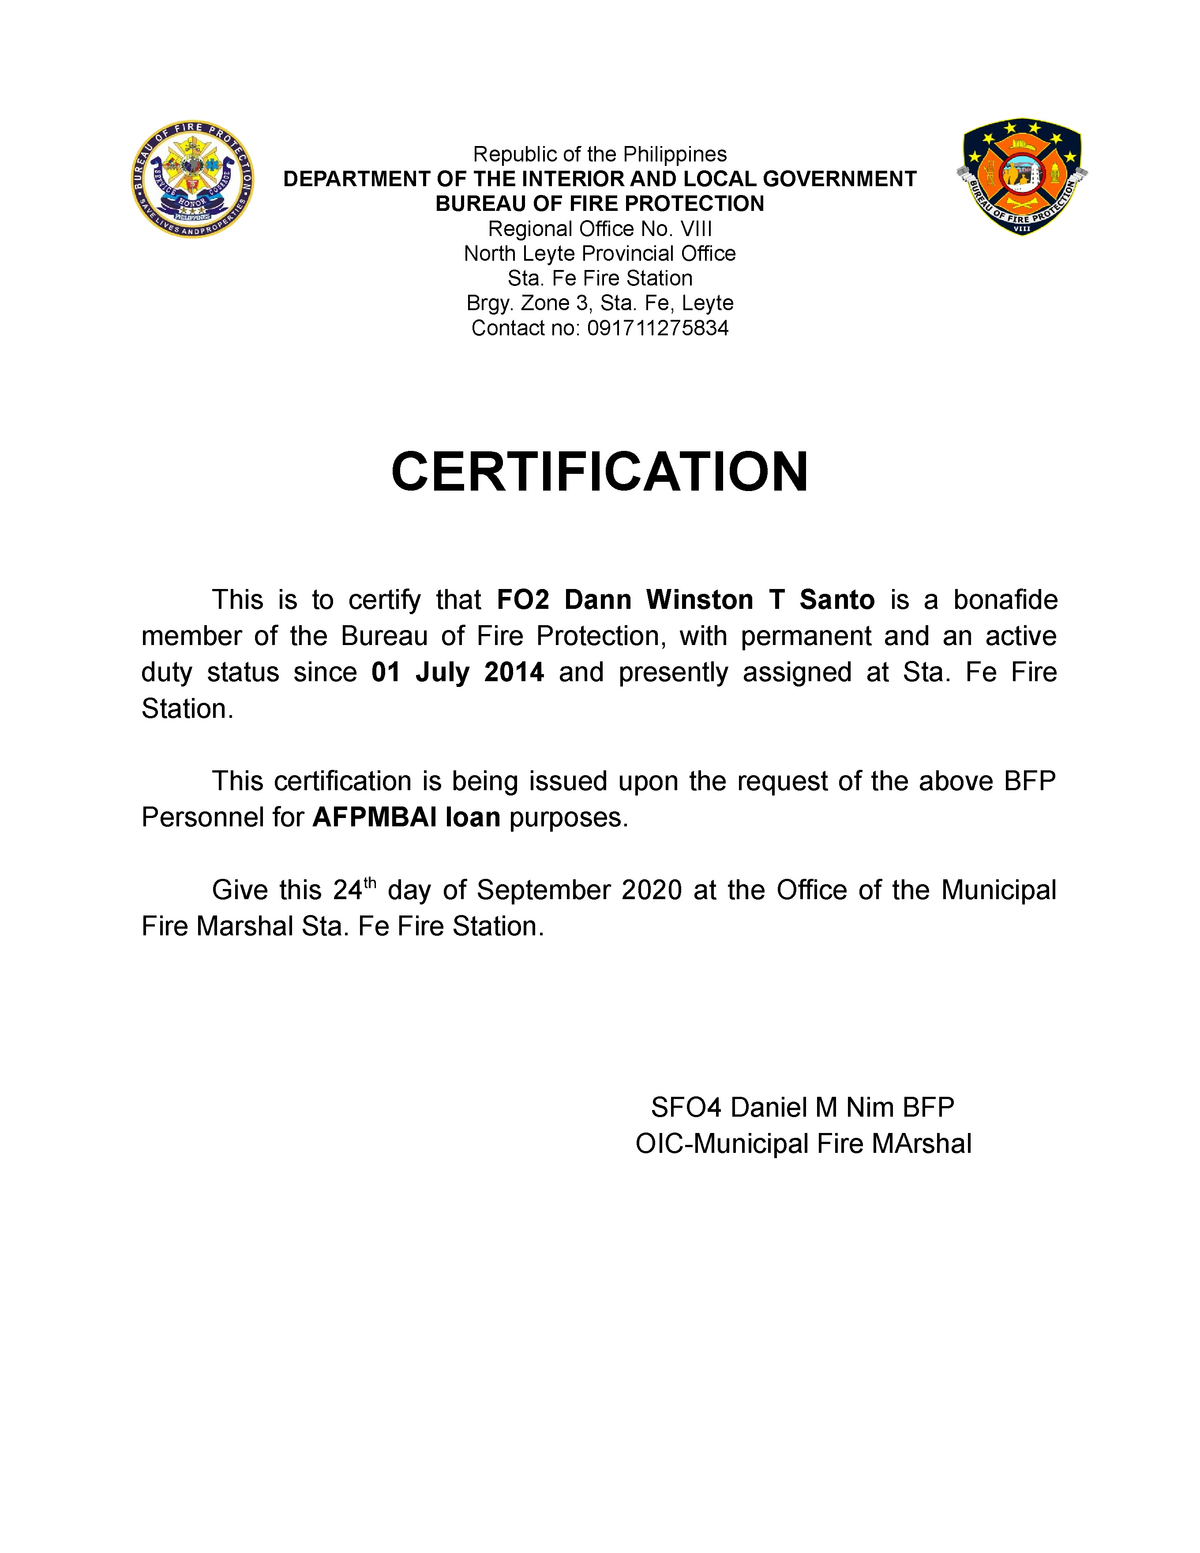 bfp-documents-in-bureau-of-fire-protection-republic-of-the